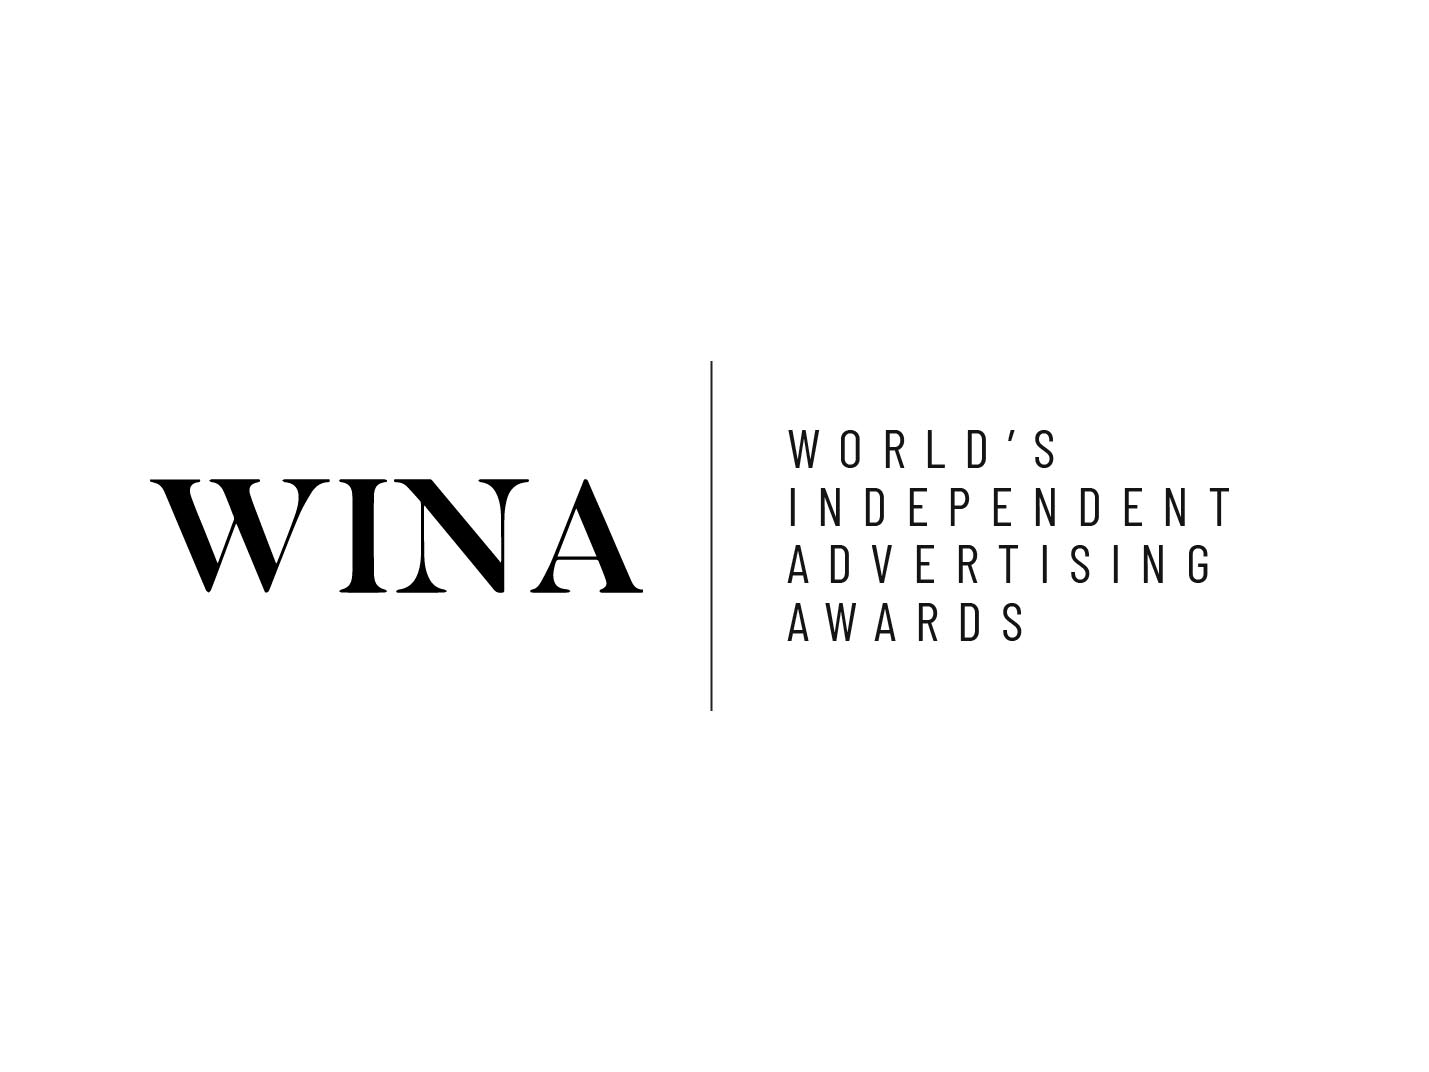 Independent creative agencies will join WINA festival in Miami and Monterrey